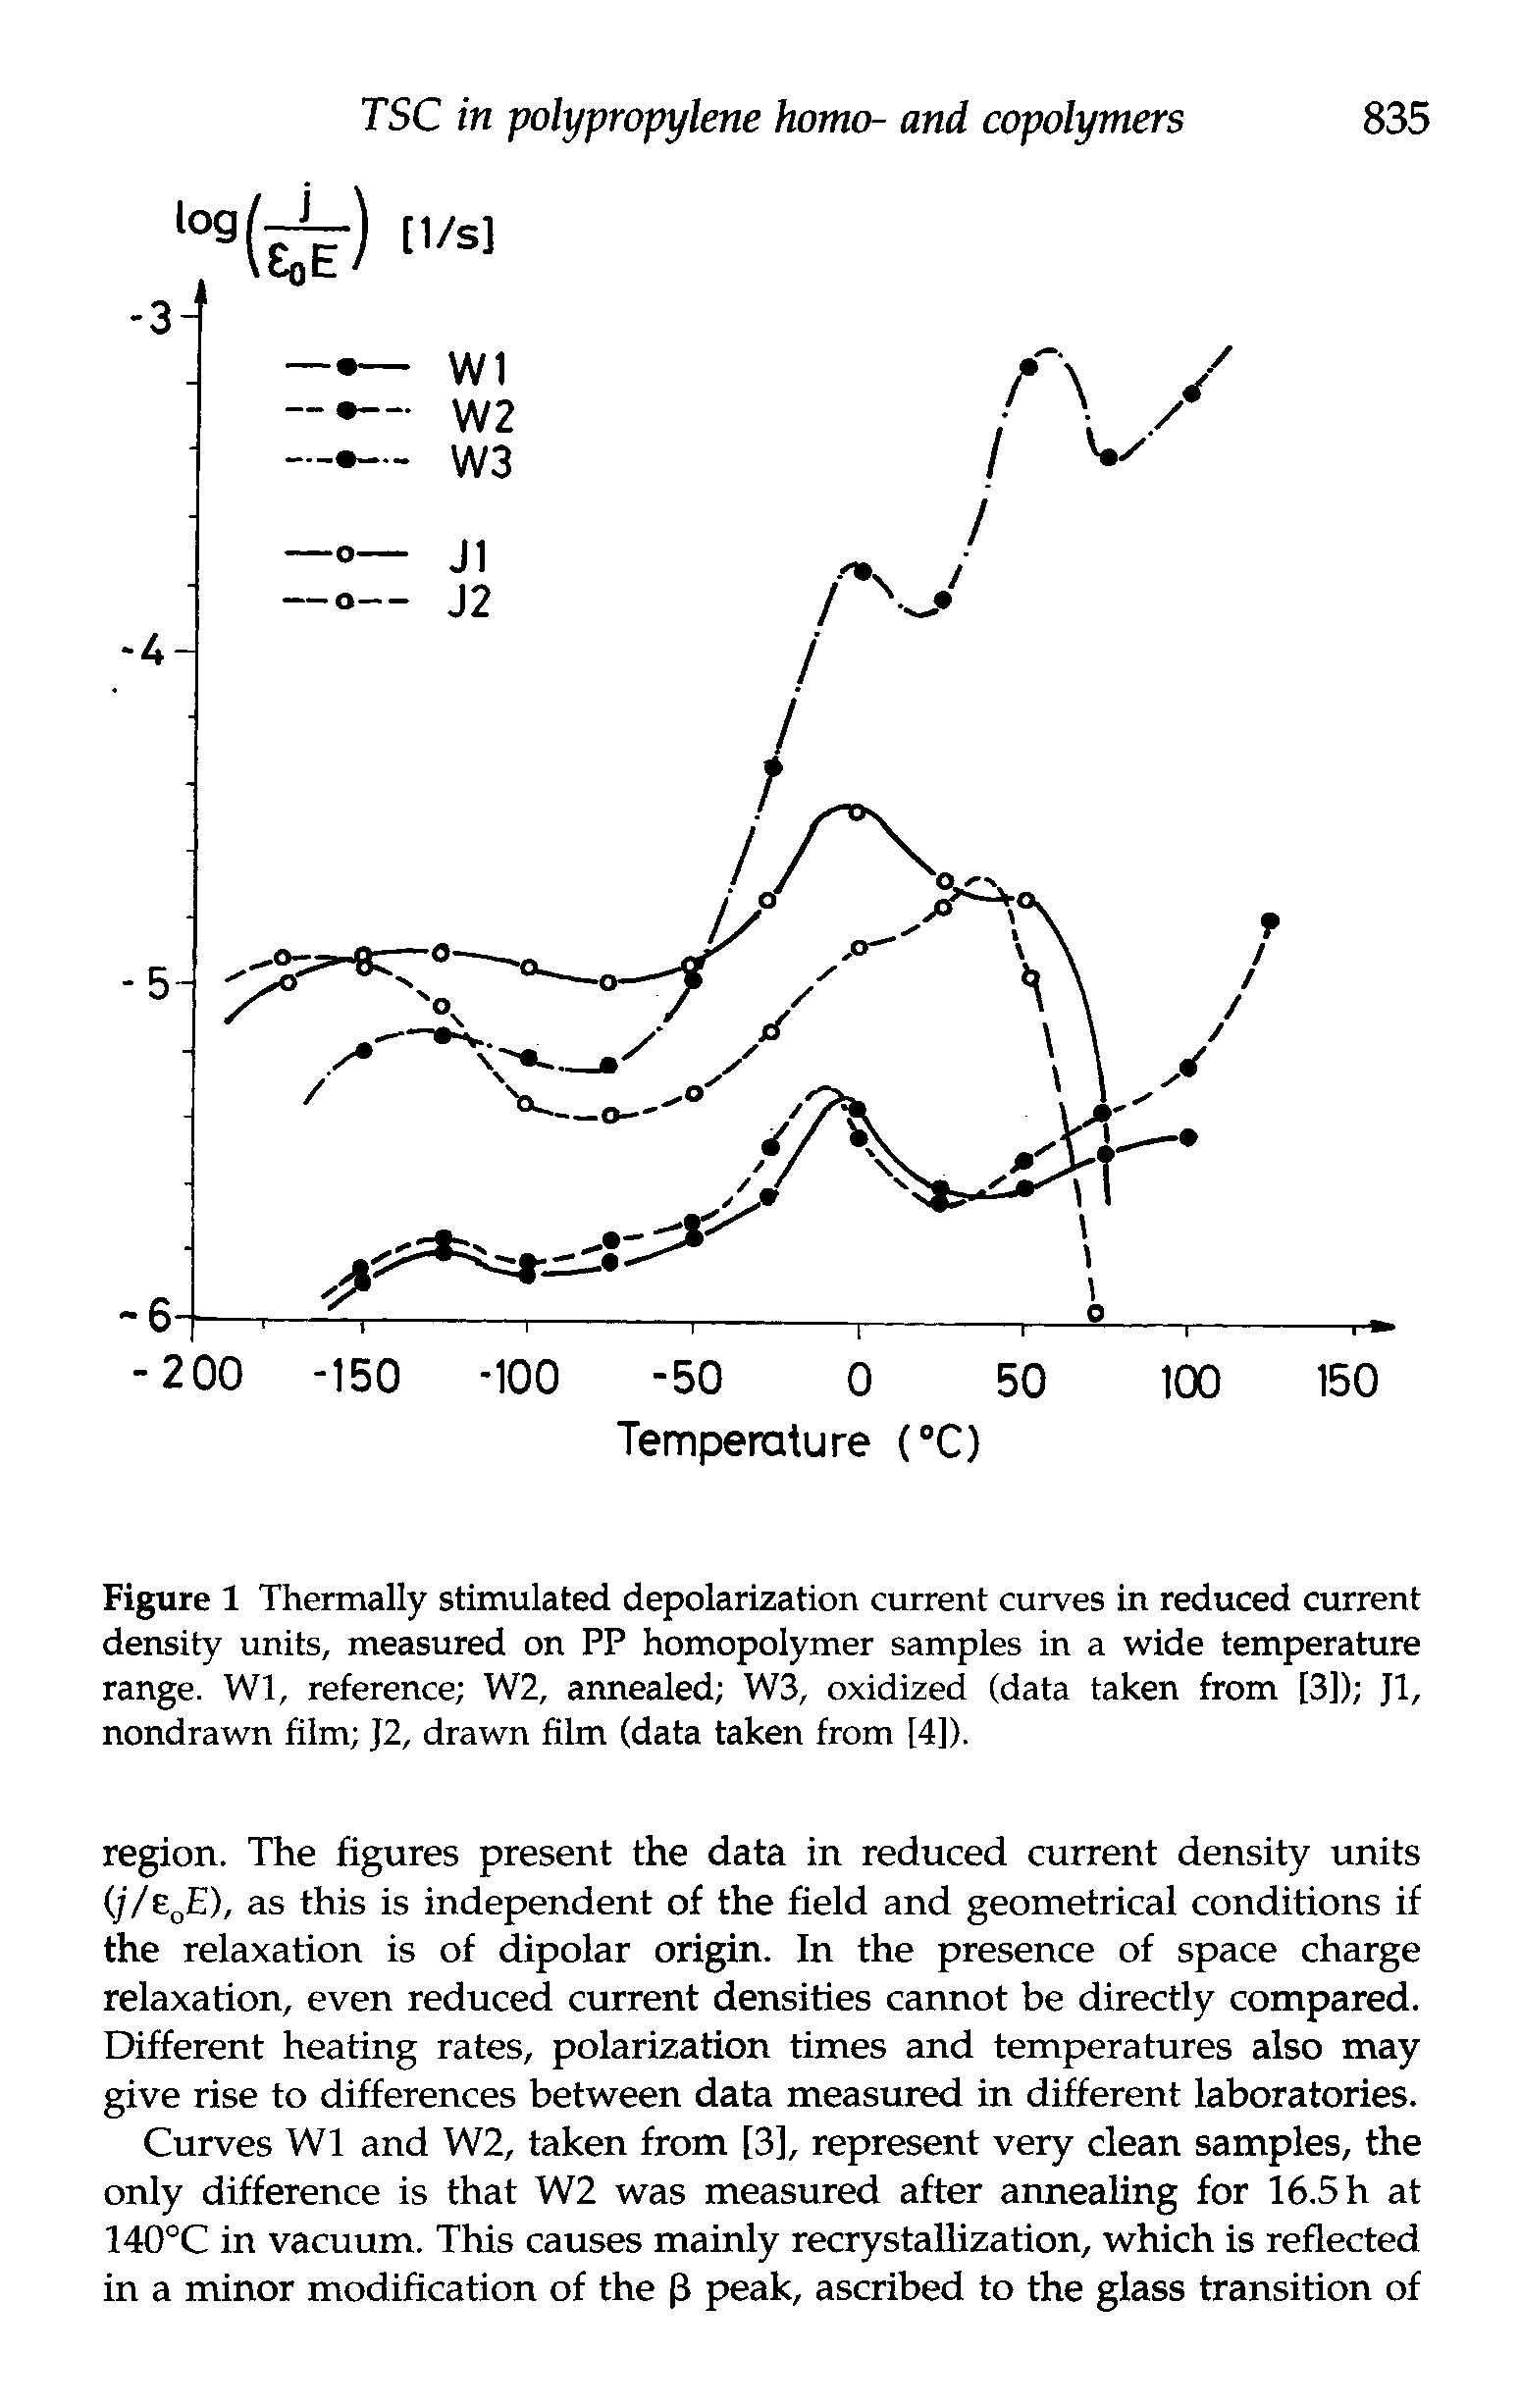 Figure 1 Thermally stimulated depolarization current curves in reduced current density units, measured on PP homopolymer samples in a wide temperature range. Wl, reference W2, annealed W3, oxidized (data taken from [3]) Jl, nondrawn film J2, drawn film (data taken from [4]).